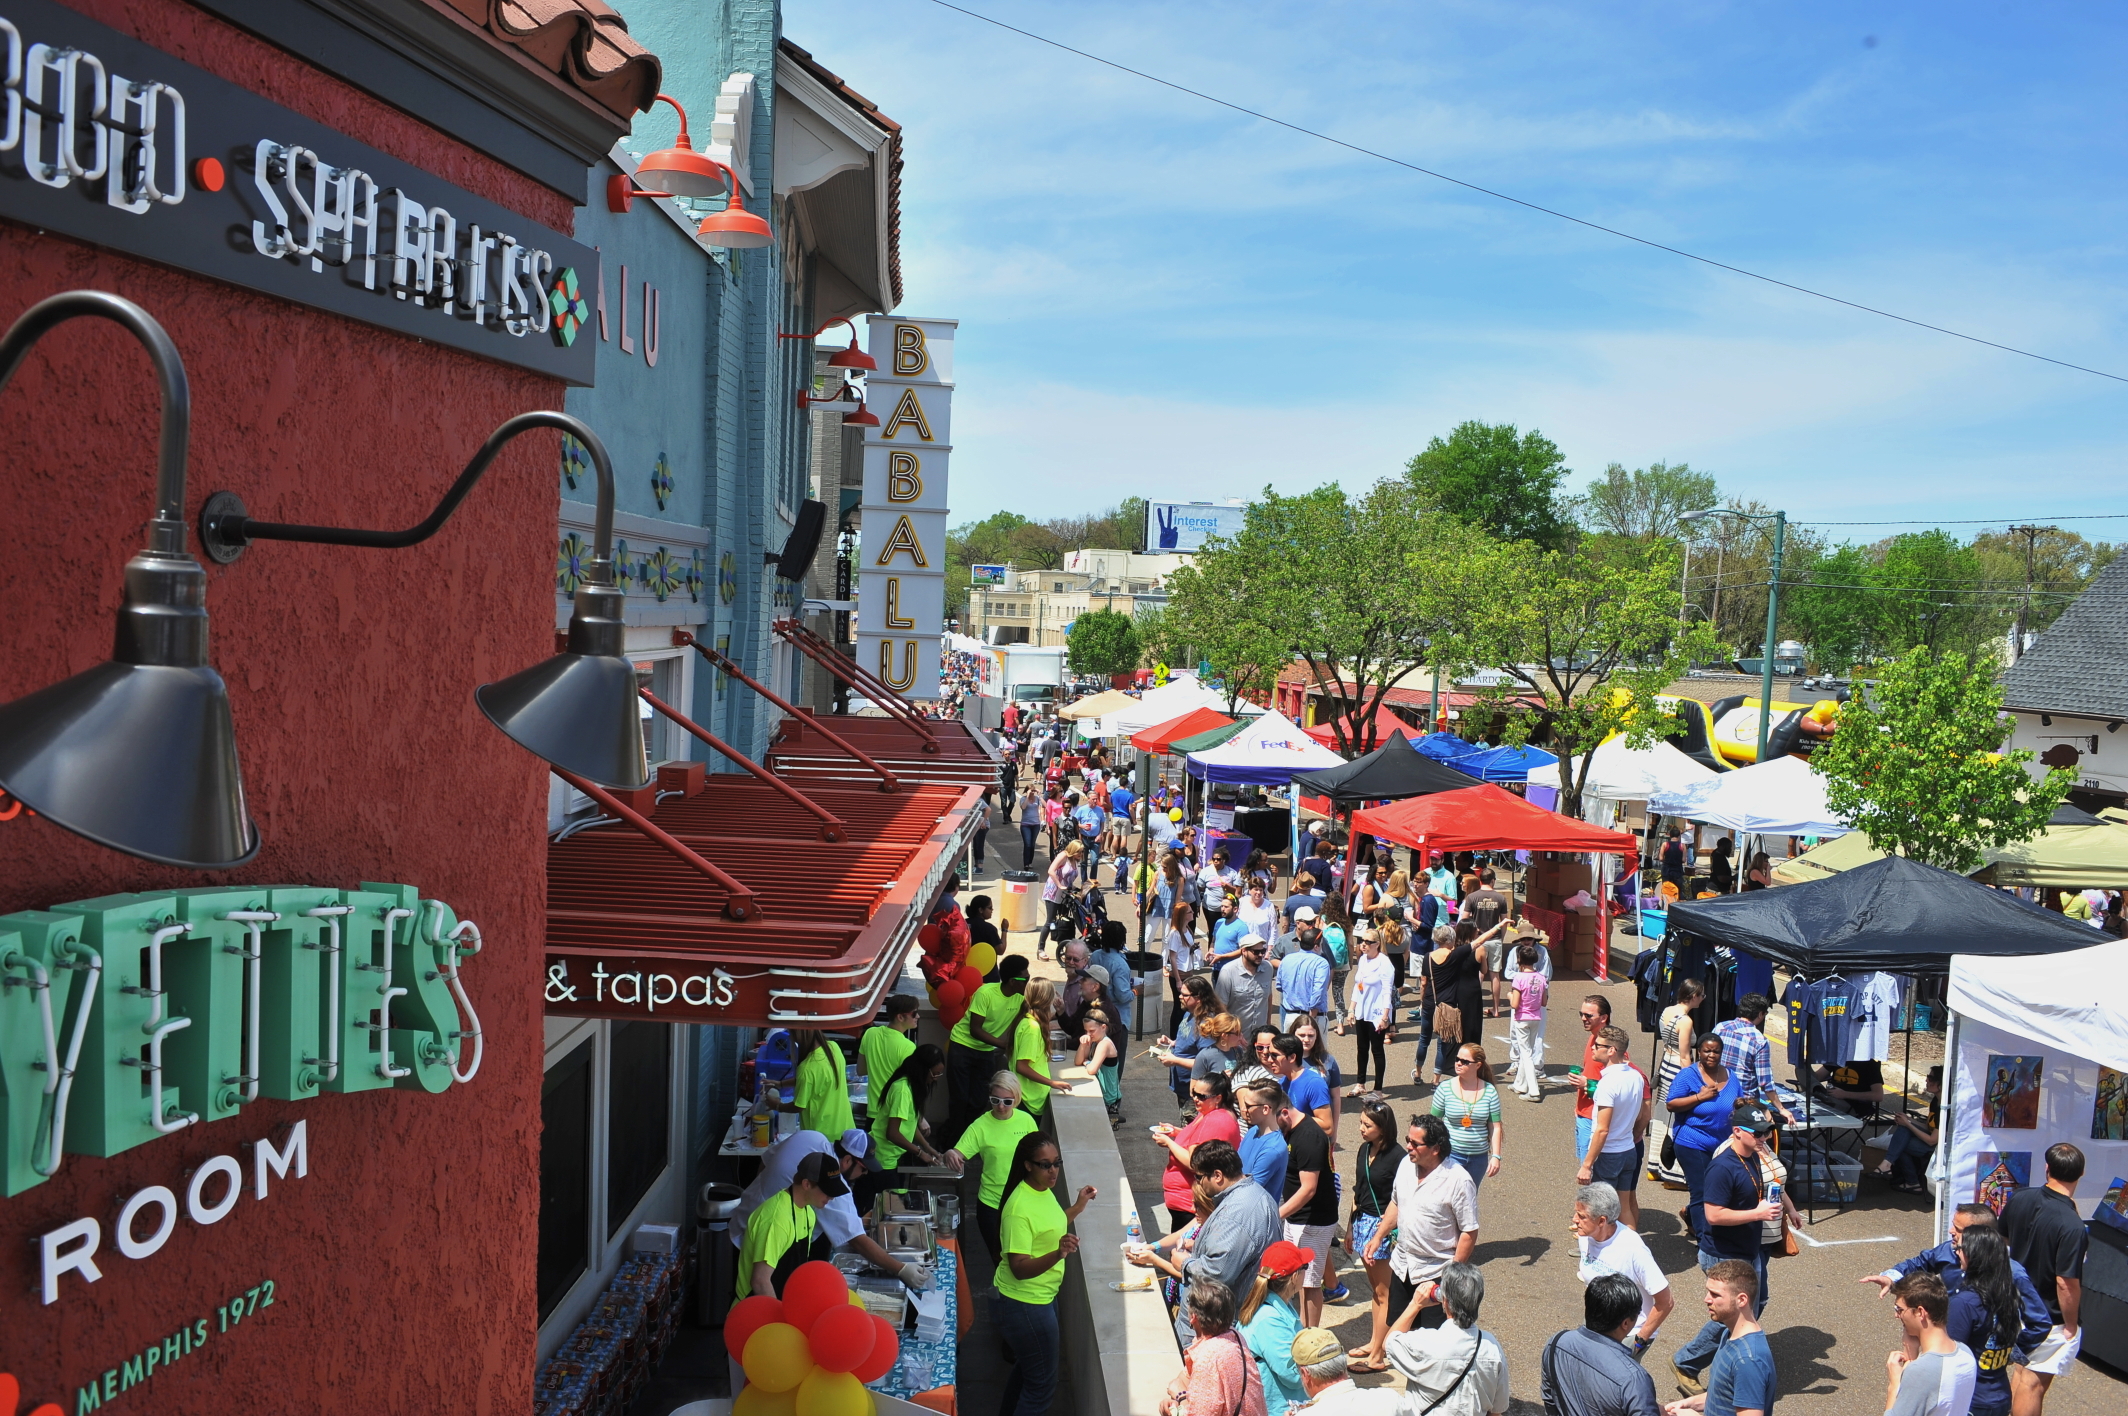  The Bayou Bar &amp; Grill Crawfish Festival attracts over 25,000 visitors to Overton Square each spring 